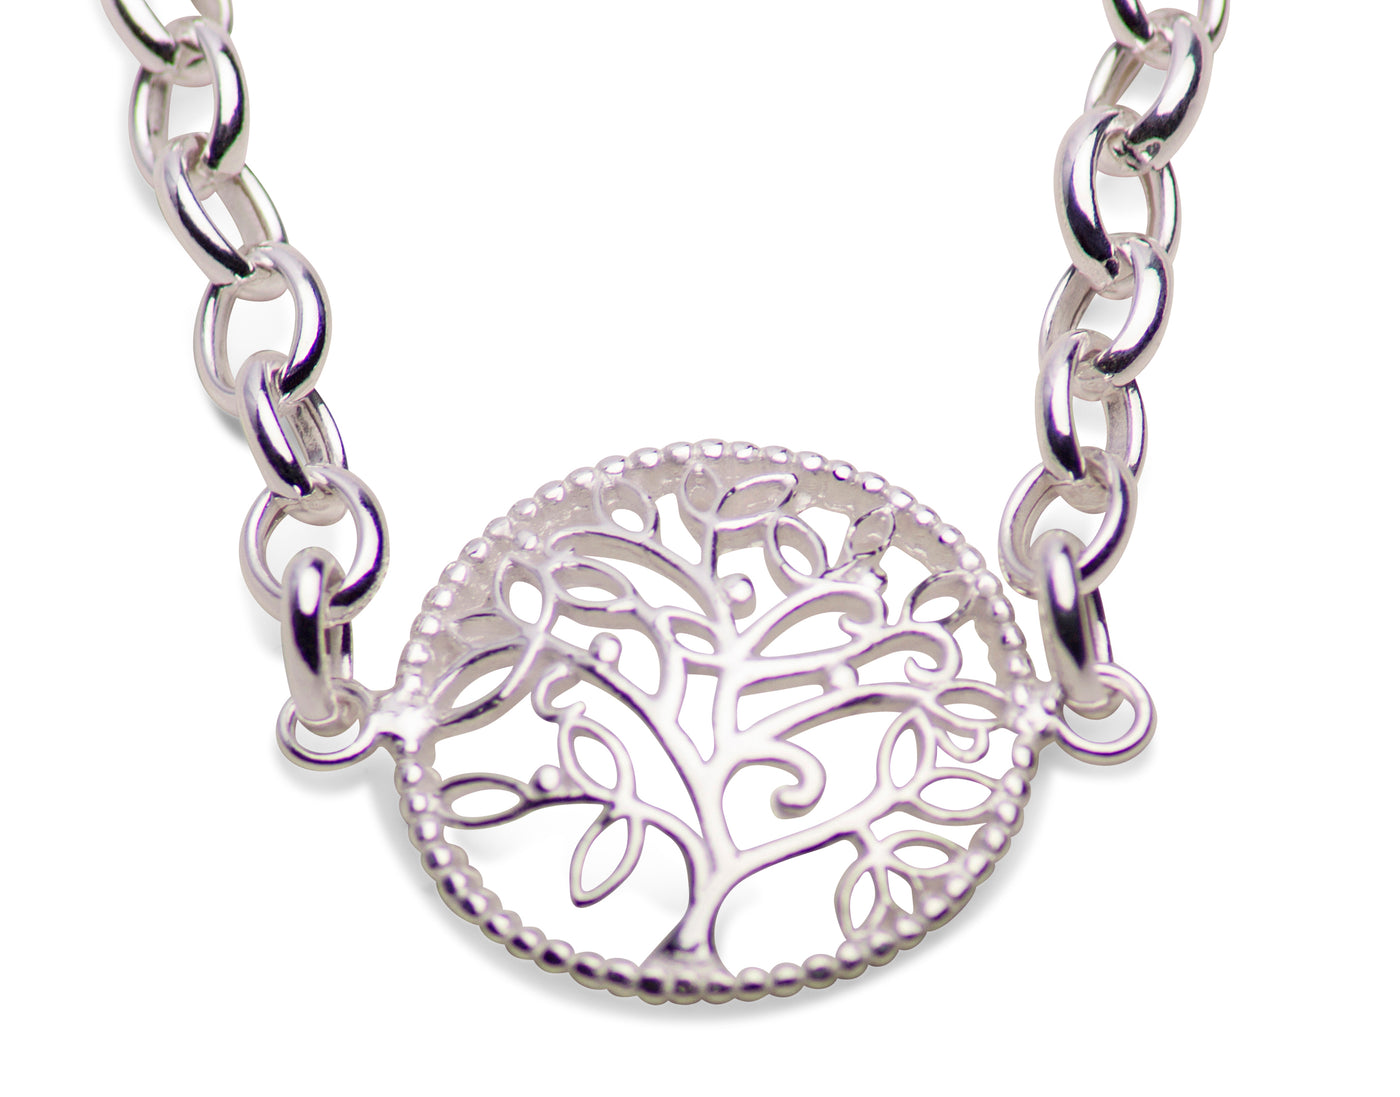 Sterling Silver Tree of Life Bracelet 7 Inch With Extension